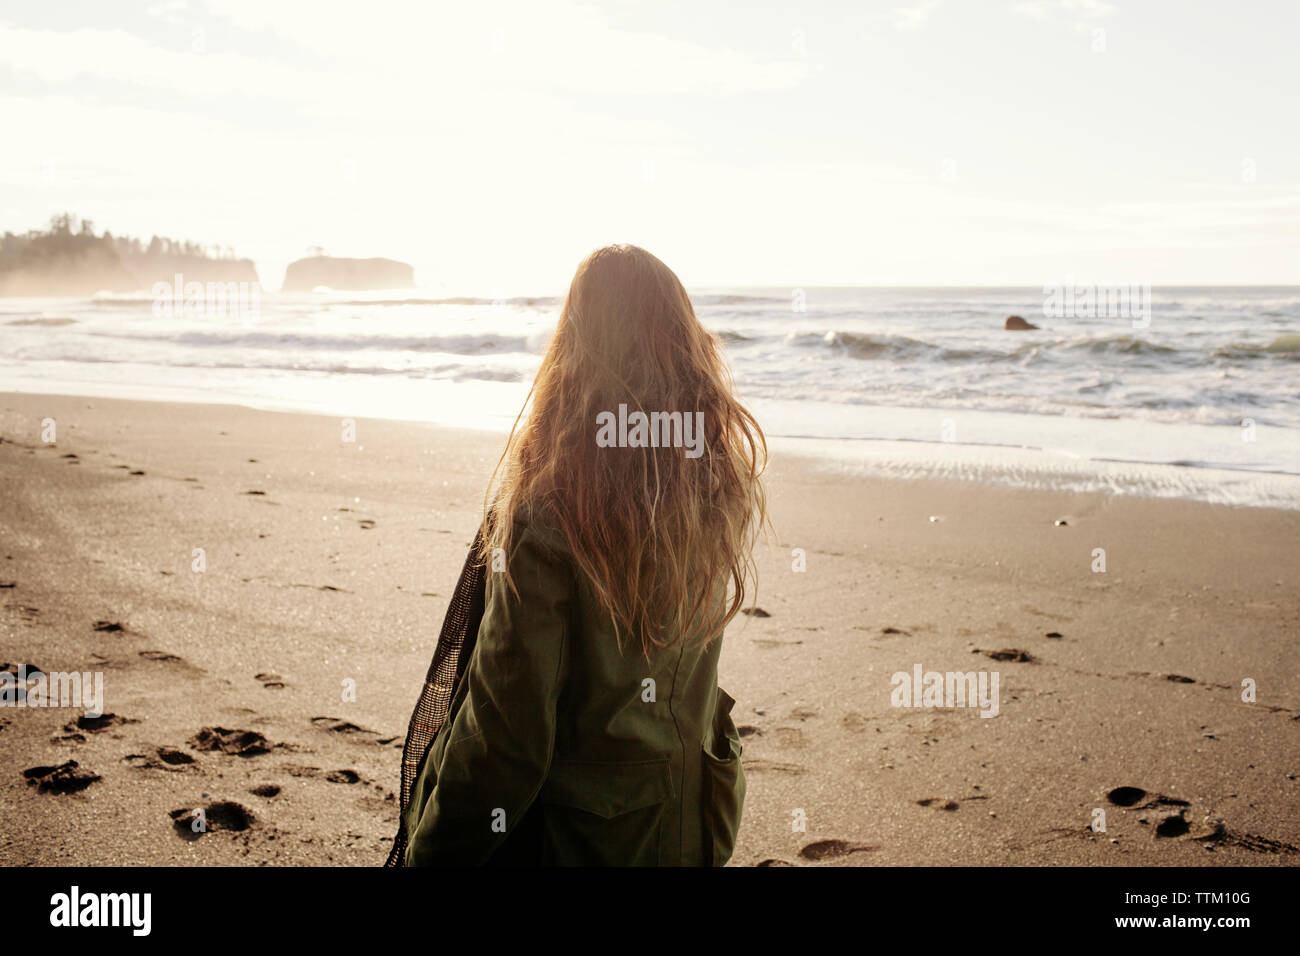 Rear view of woman standing on beach pendant l'hiver Banque D'Images